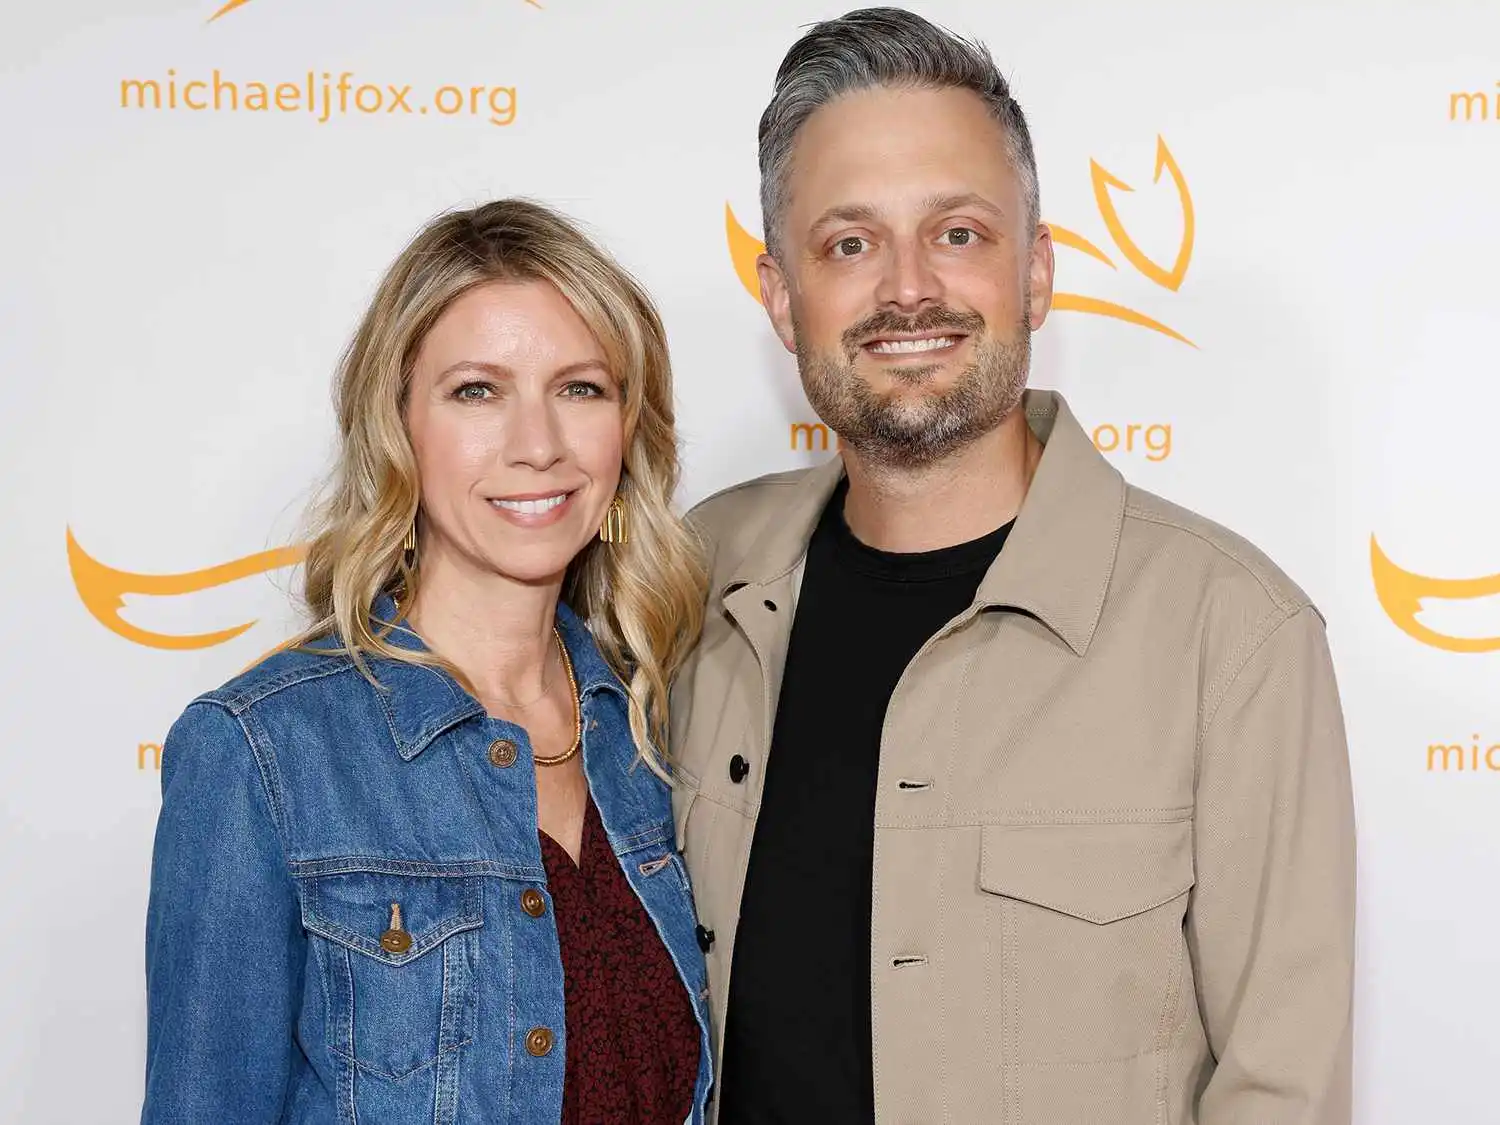 Who Is Laura Bargatze? Age, Bio, Career And More Of Nate Bargatze’s Wife